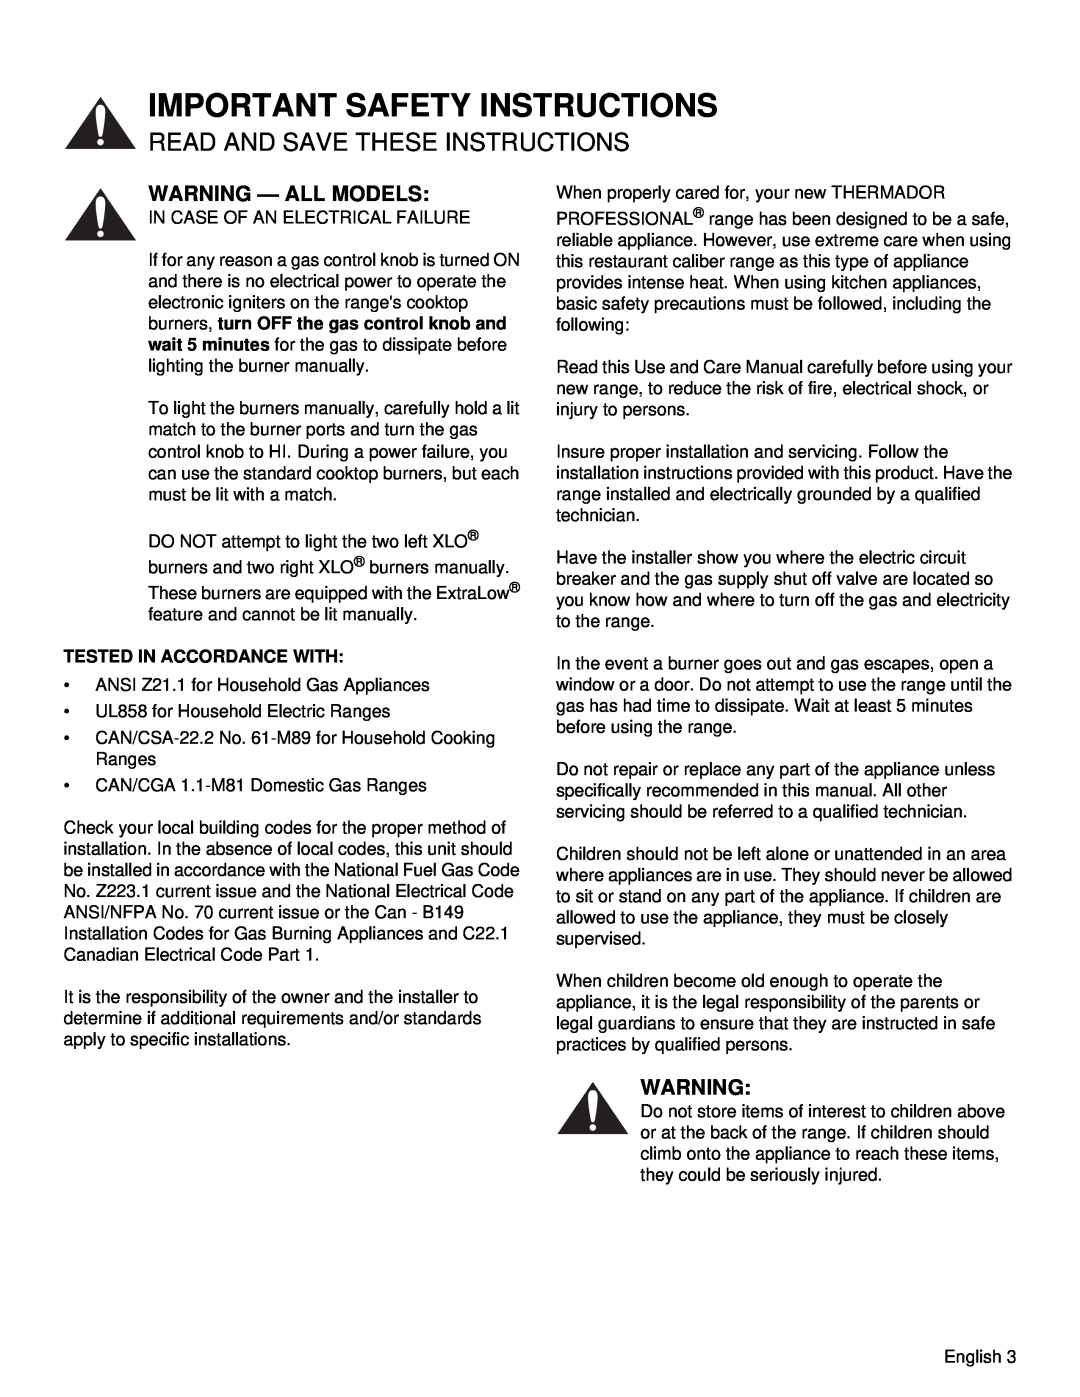 Thermador PRD48, PRD36 manual Warning — All Models, Important Safety Instructions, Read And Save These Instructions 